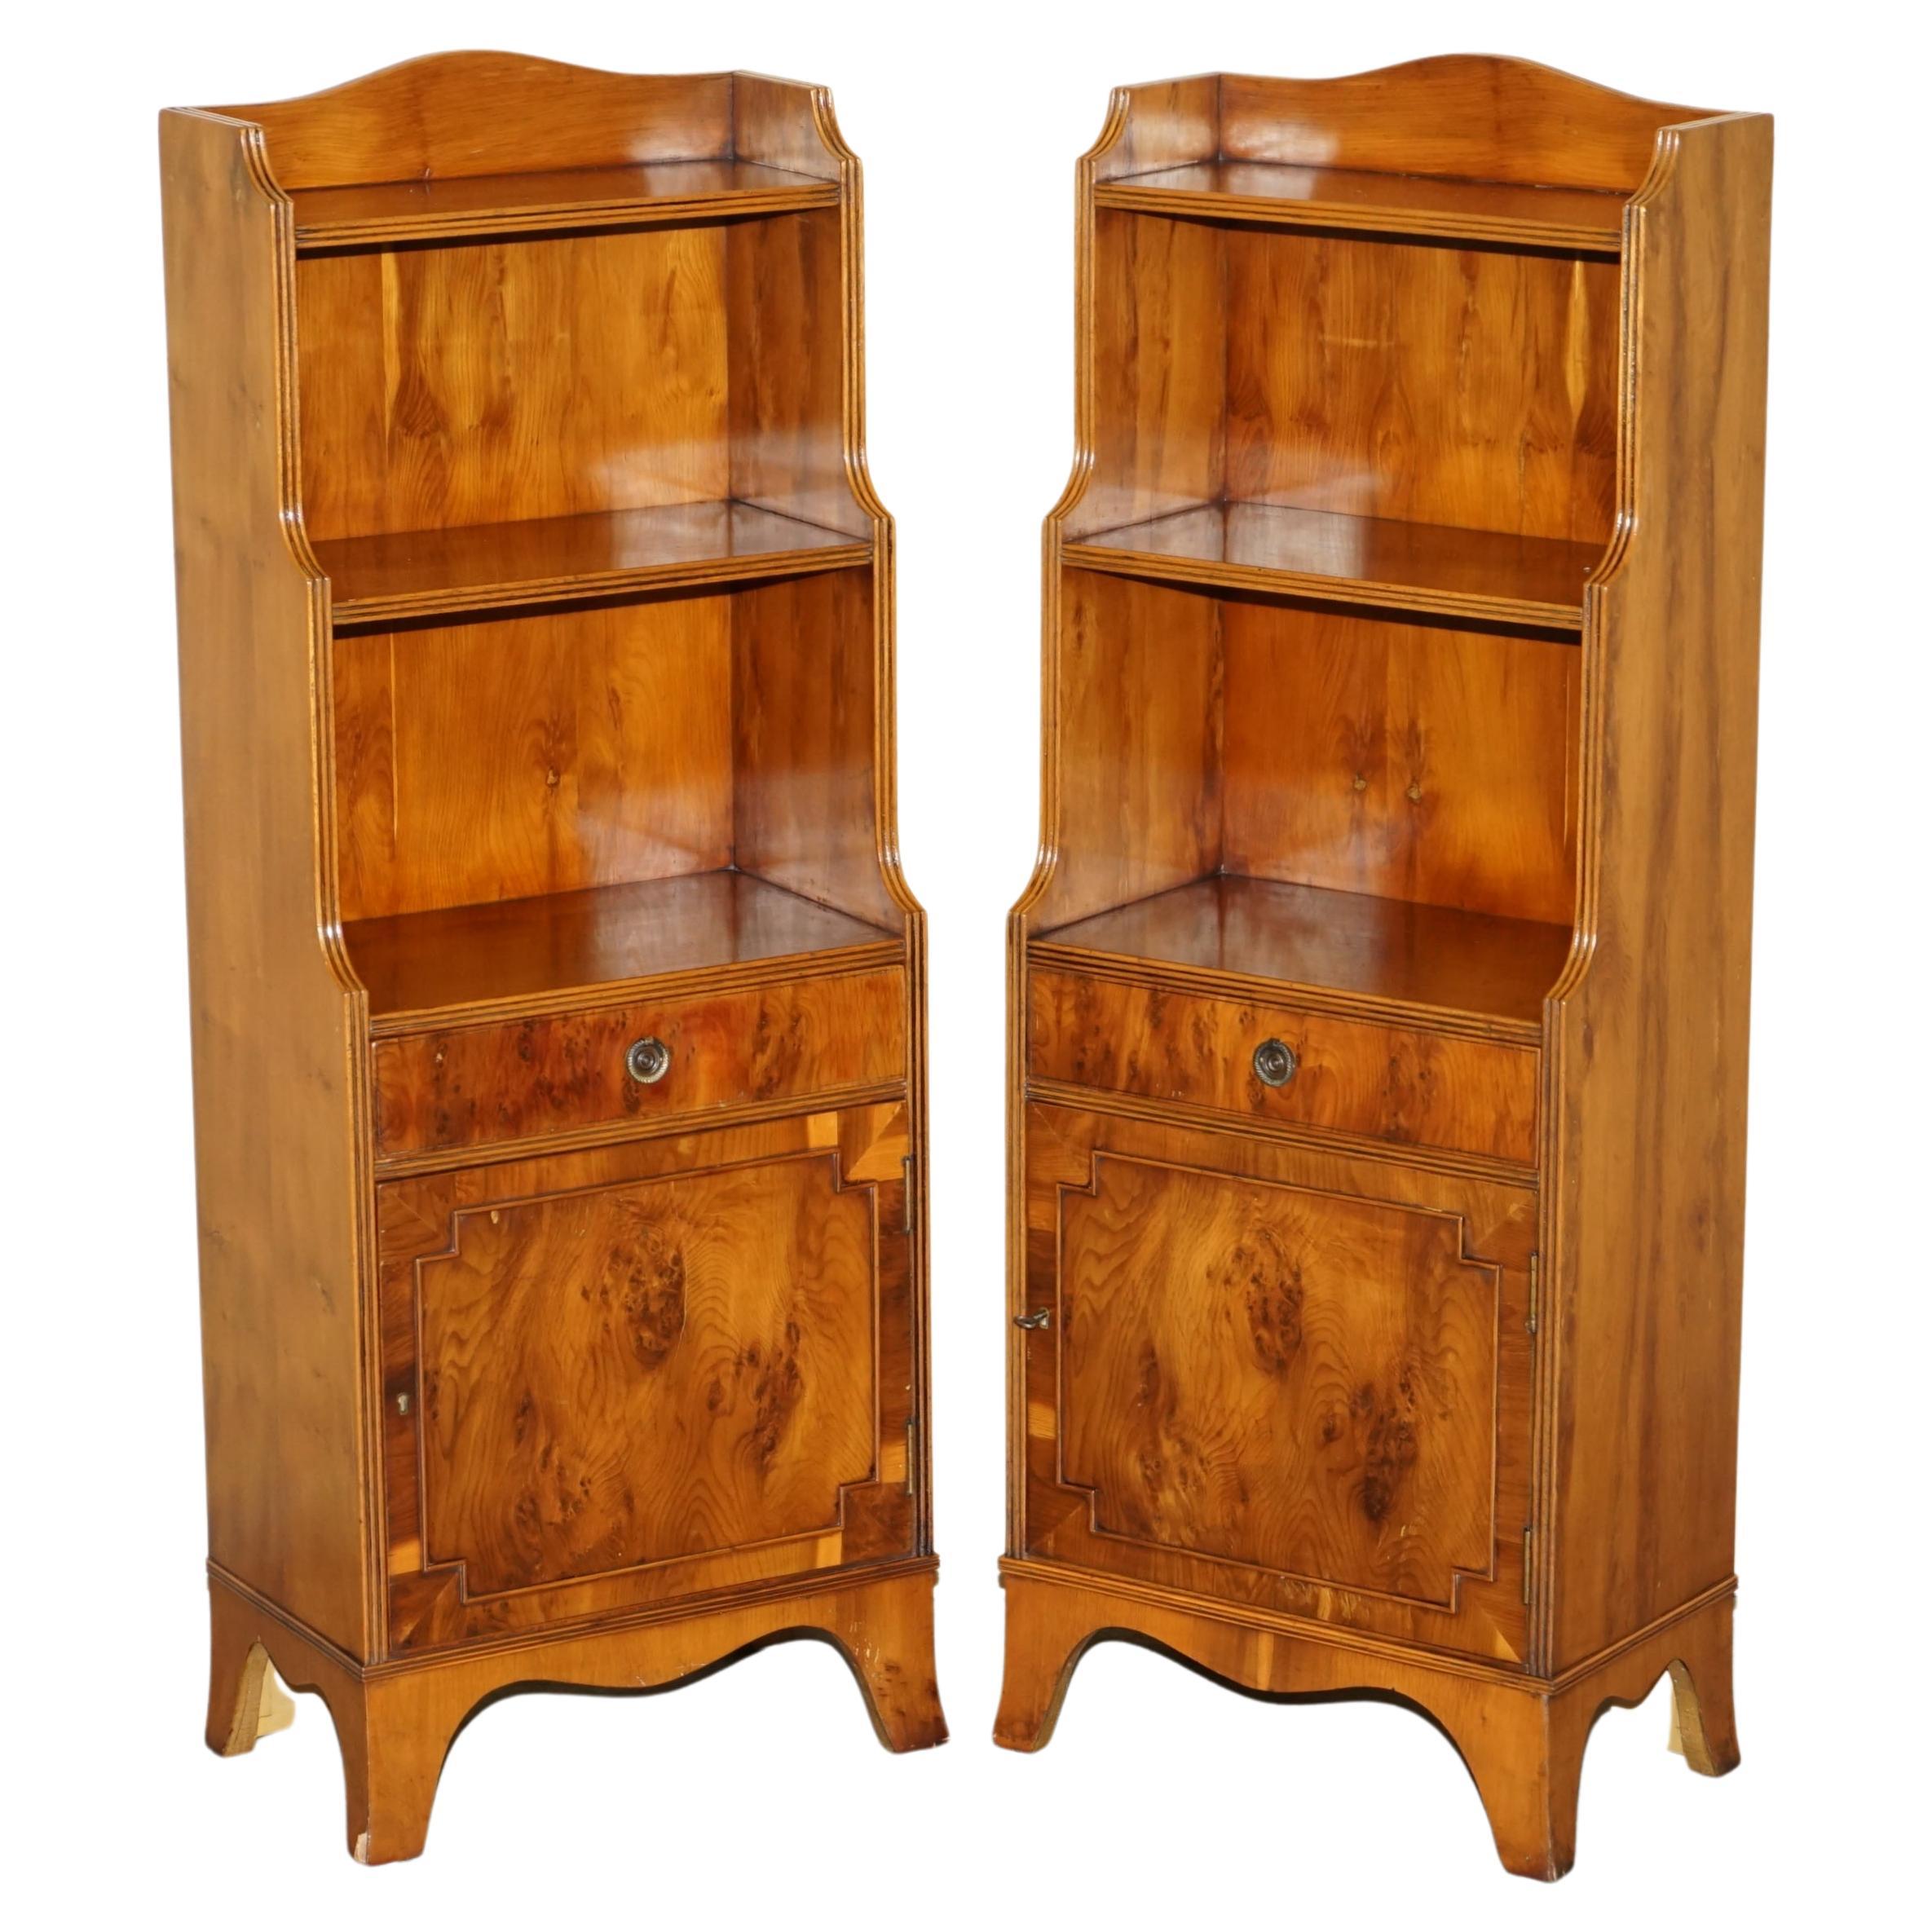 PAIR OF ViNTAGE ENGLISH FLAMED HARDWOOD WATERFALL BOOKCASES WITH CUPBOARD BASES For Sale